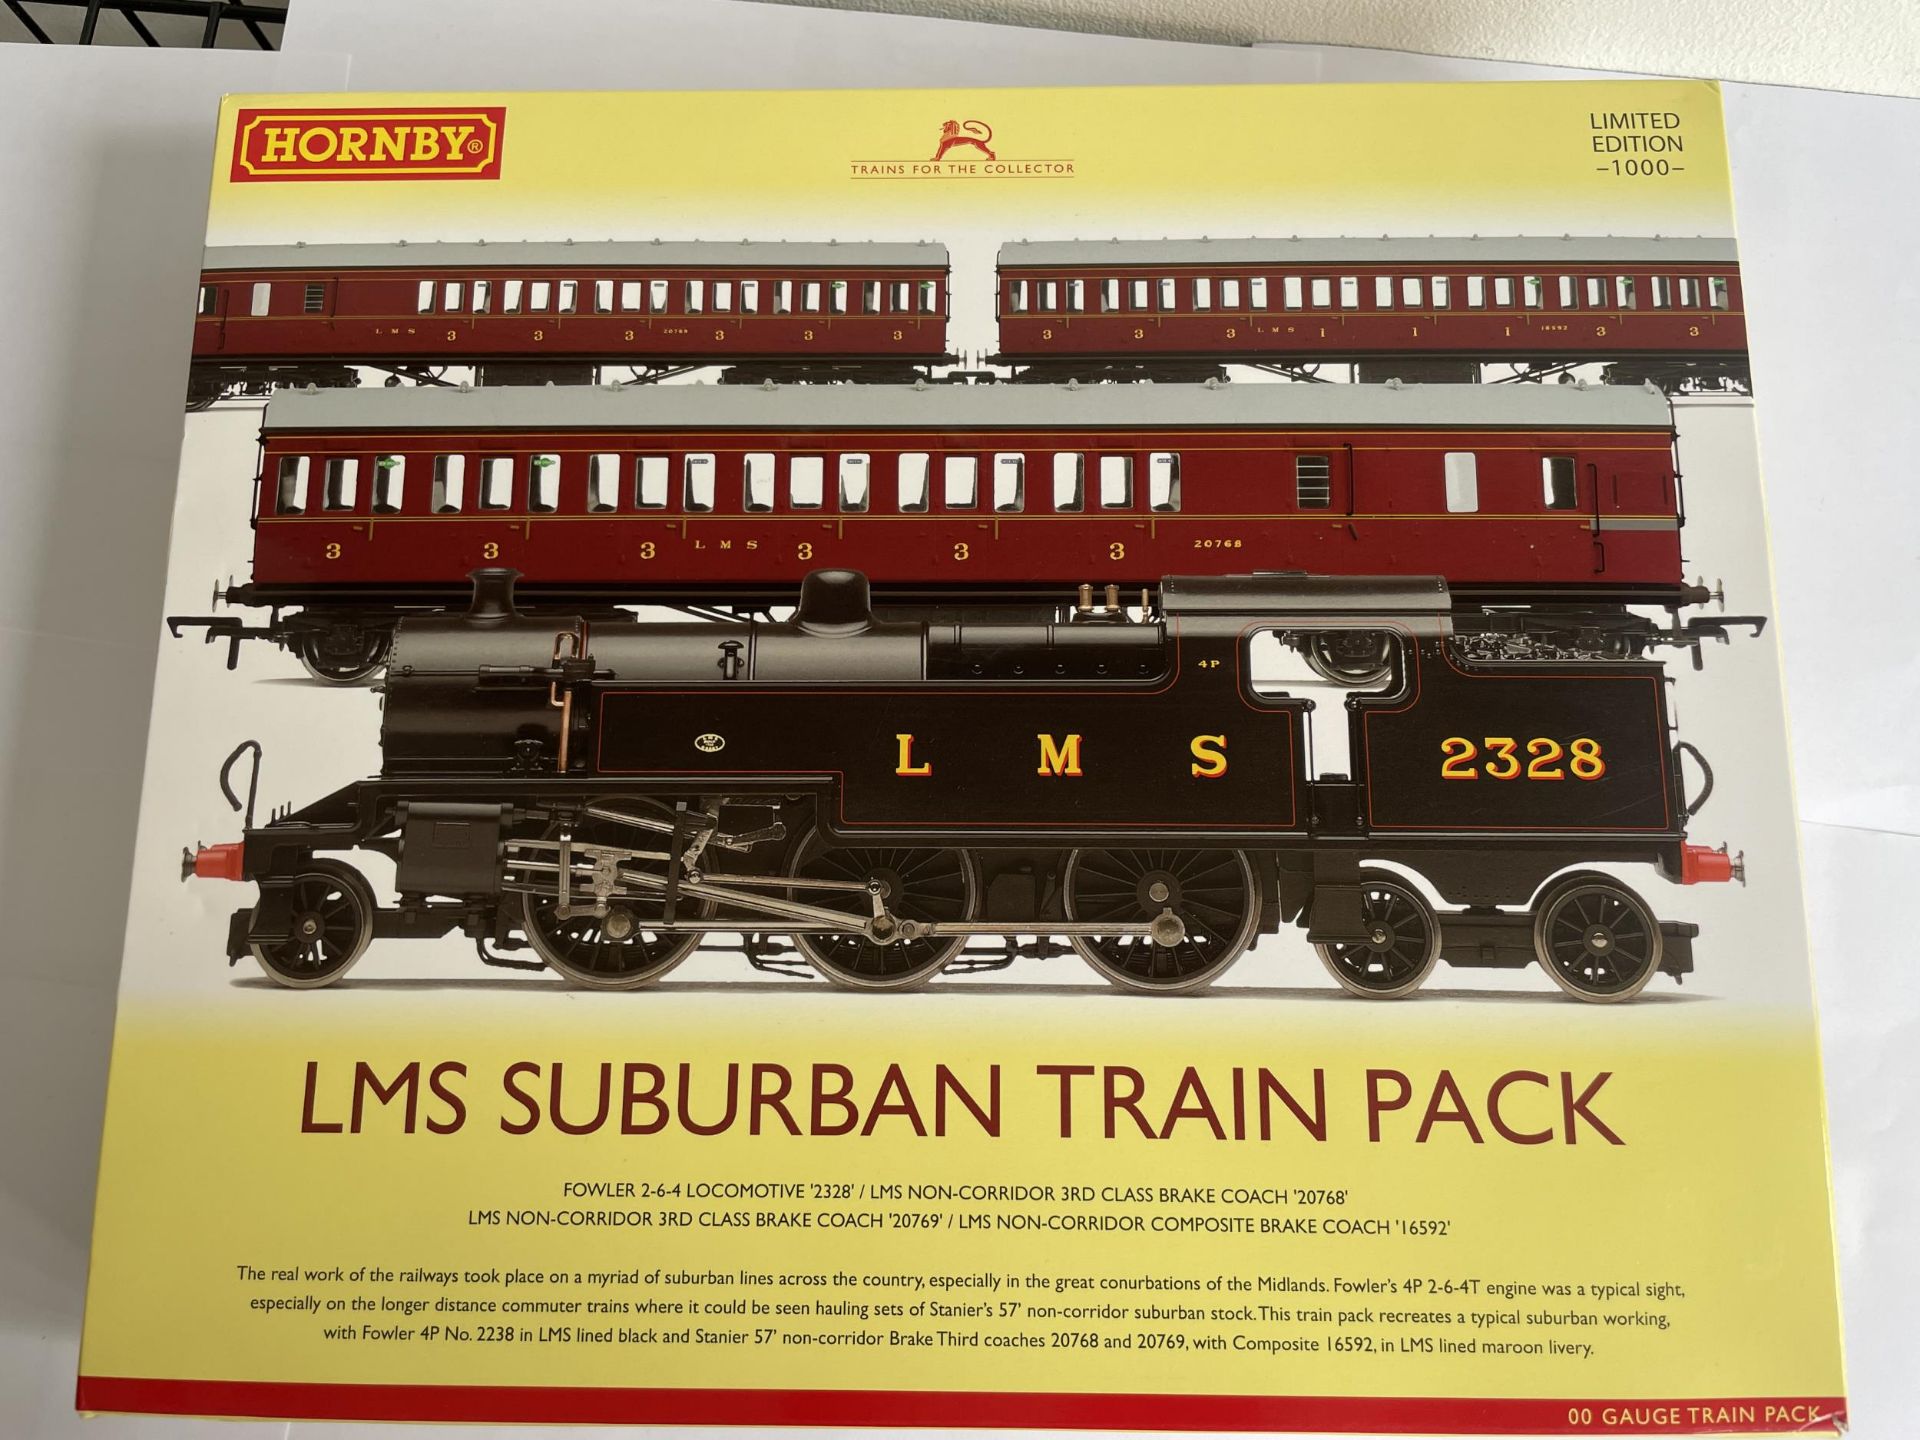 A HORNBY LIMITED EDITION OF 1000 AS NEW AND UNUSED BOXED LMS SUBURBAN TRAIN PACK 00 GAUGE